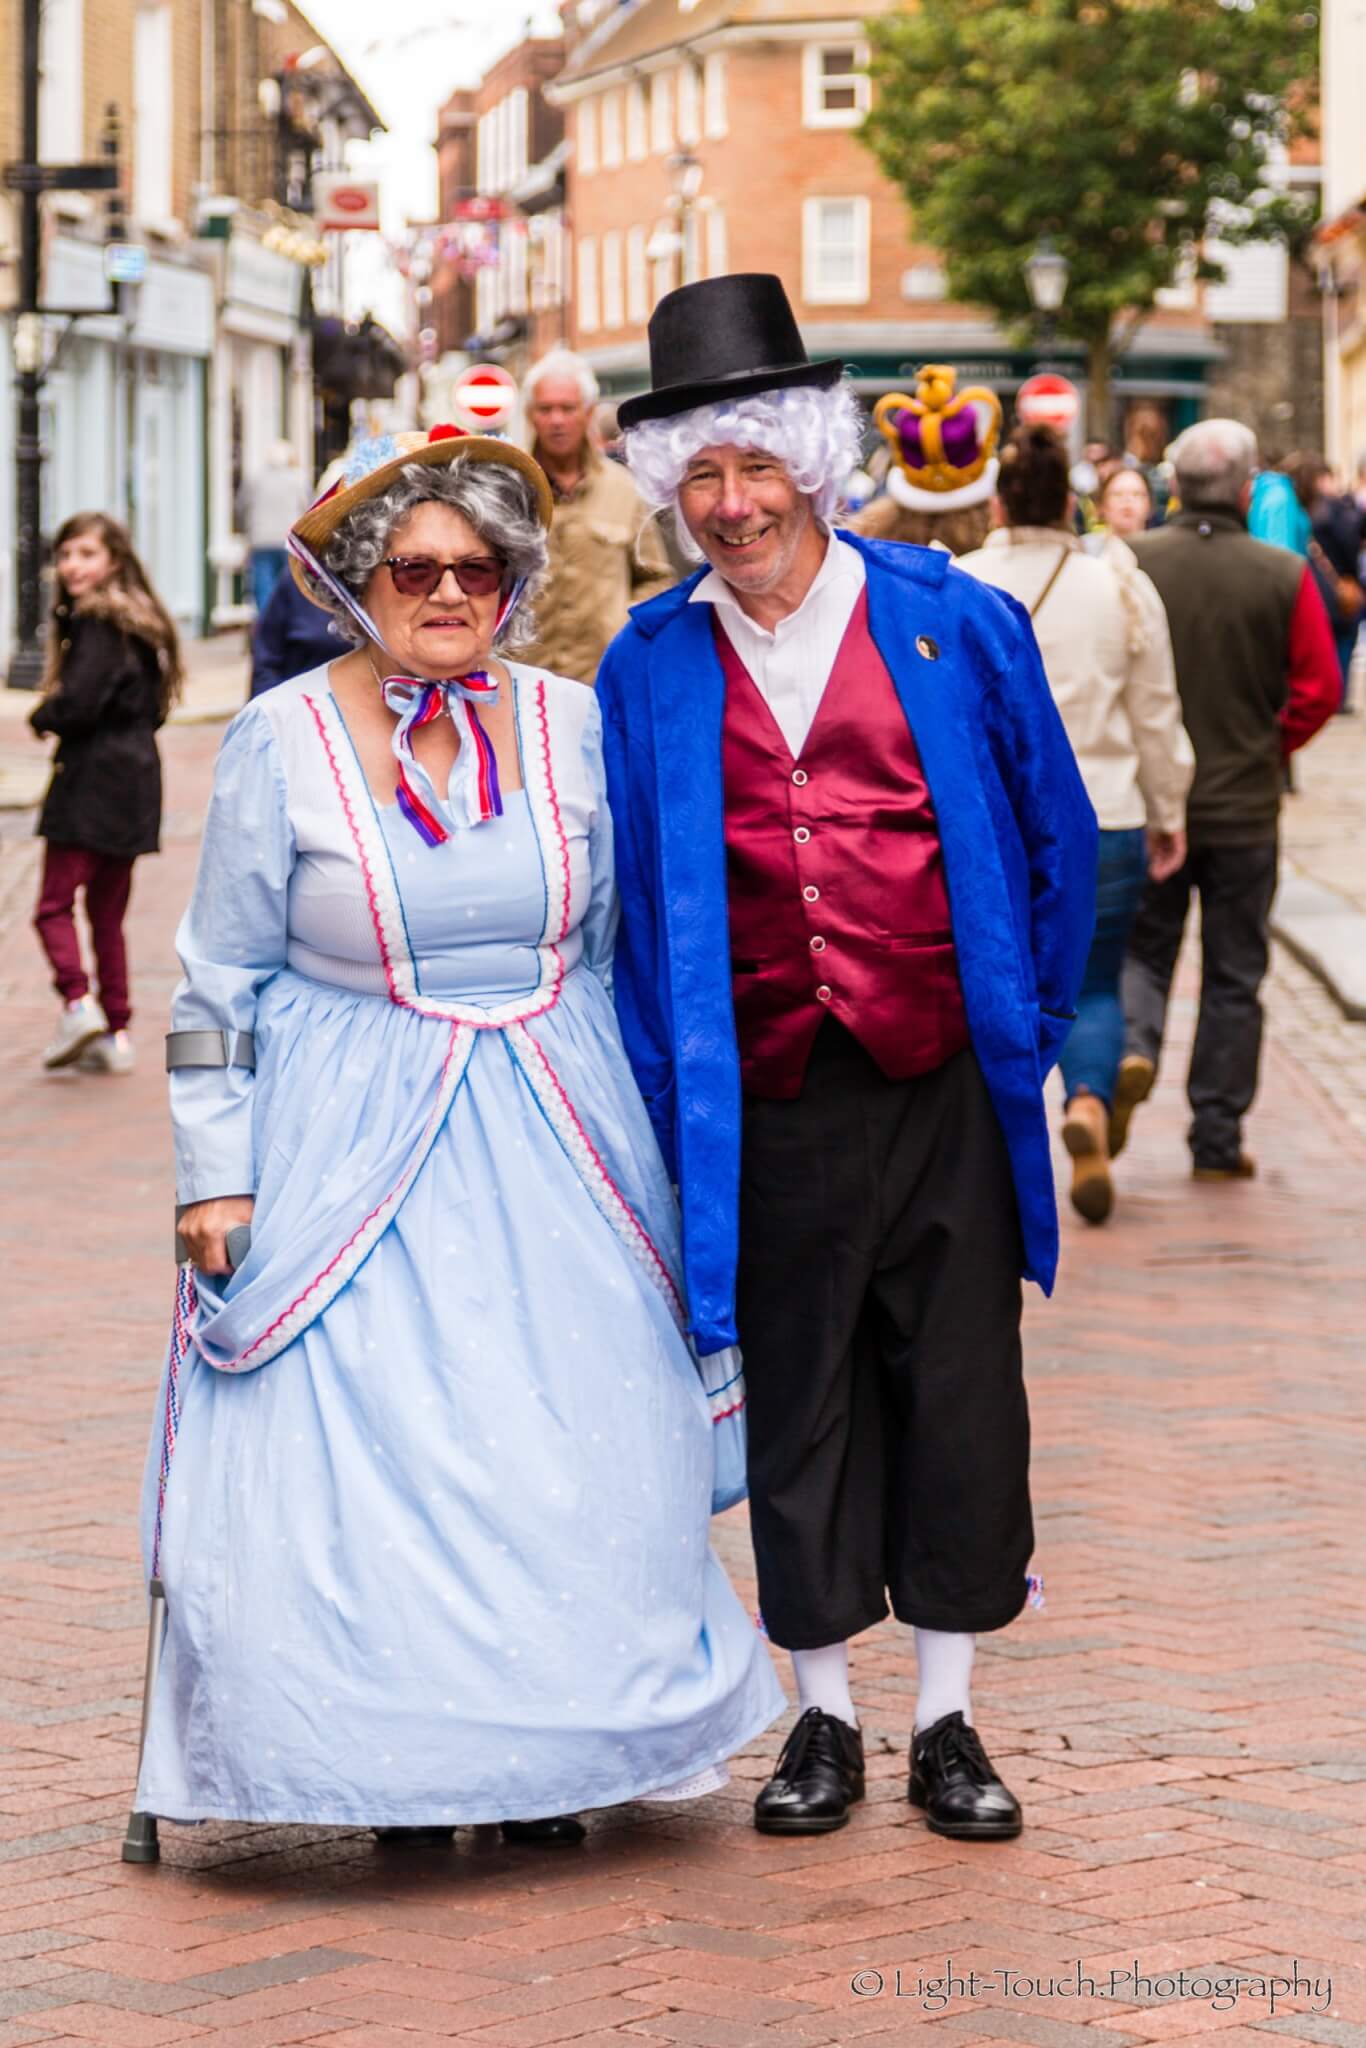 Two Dickensian costumes